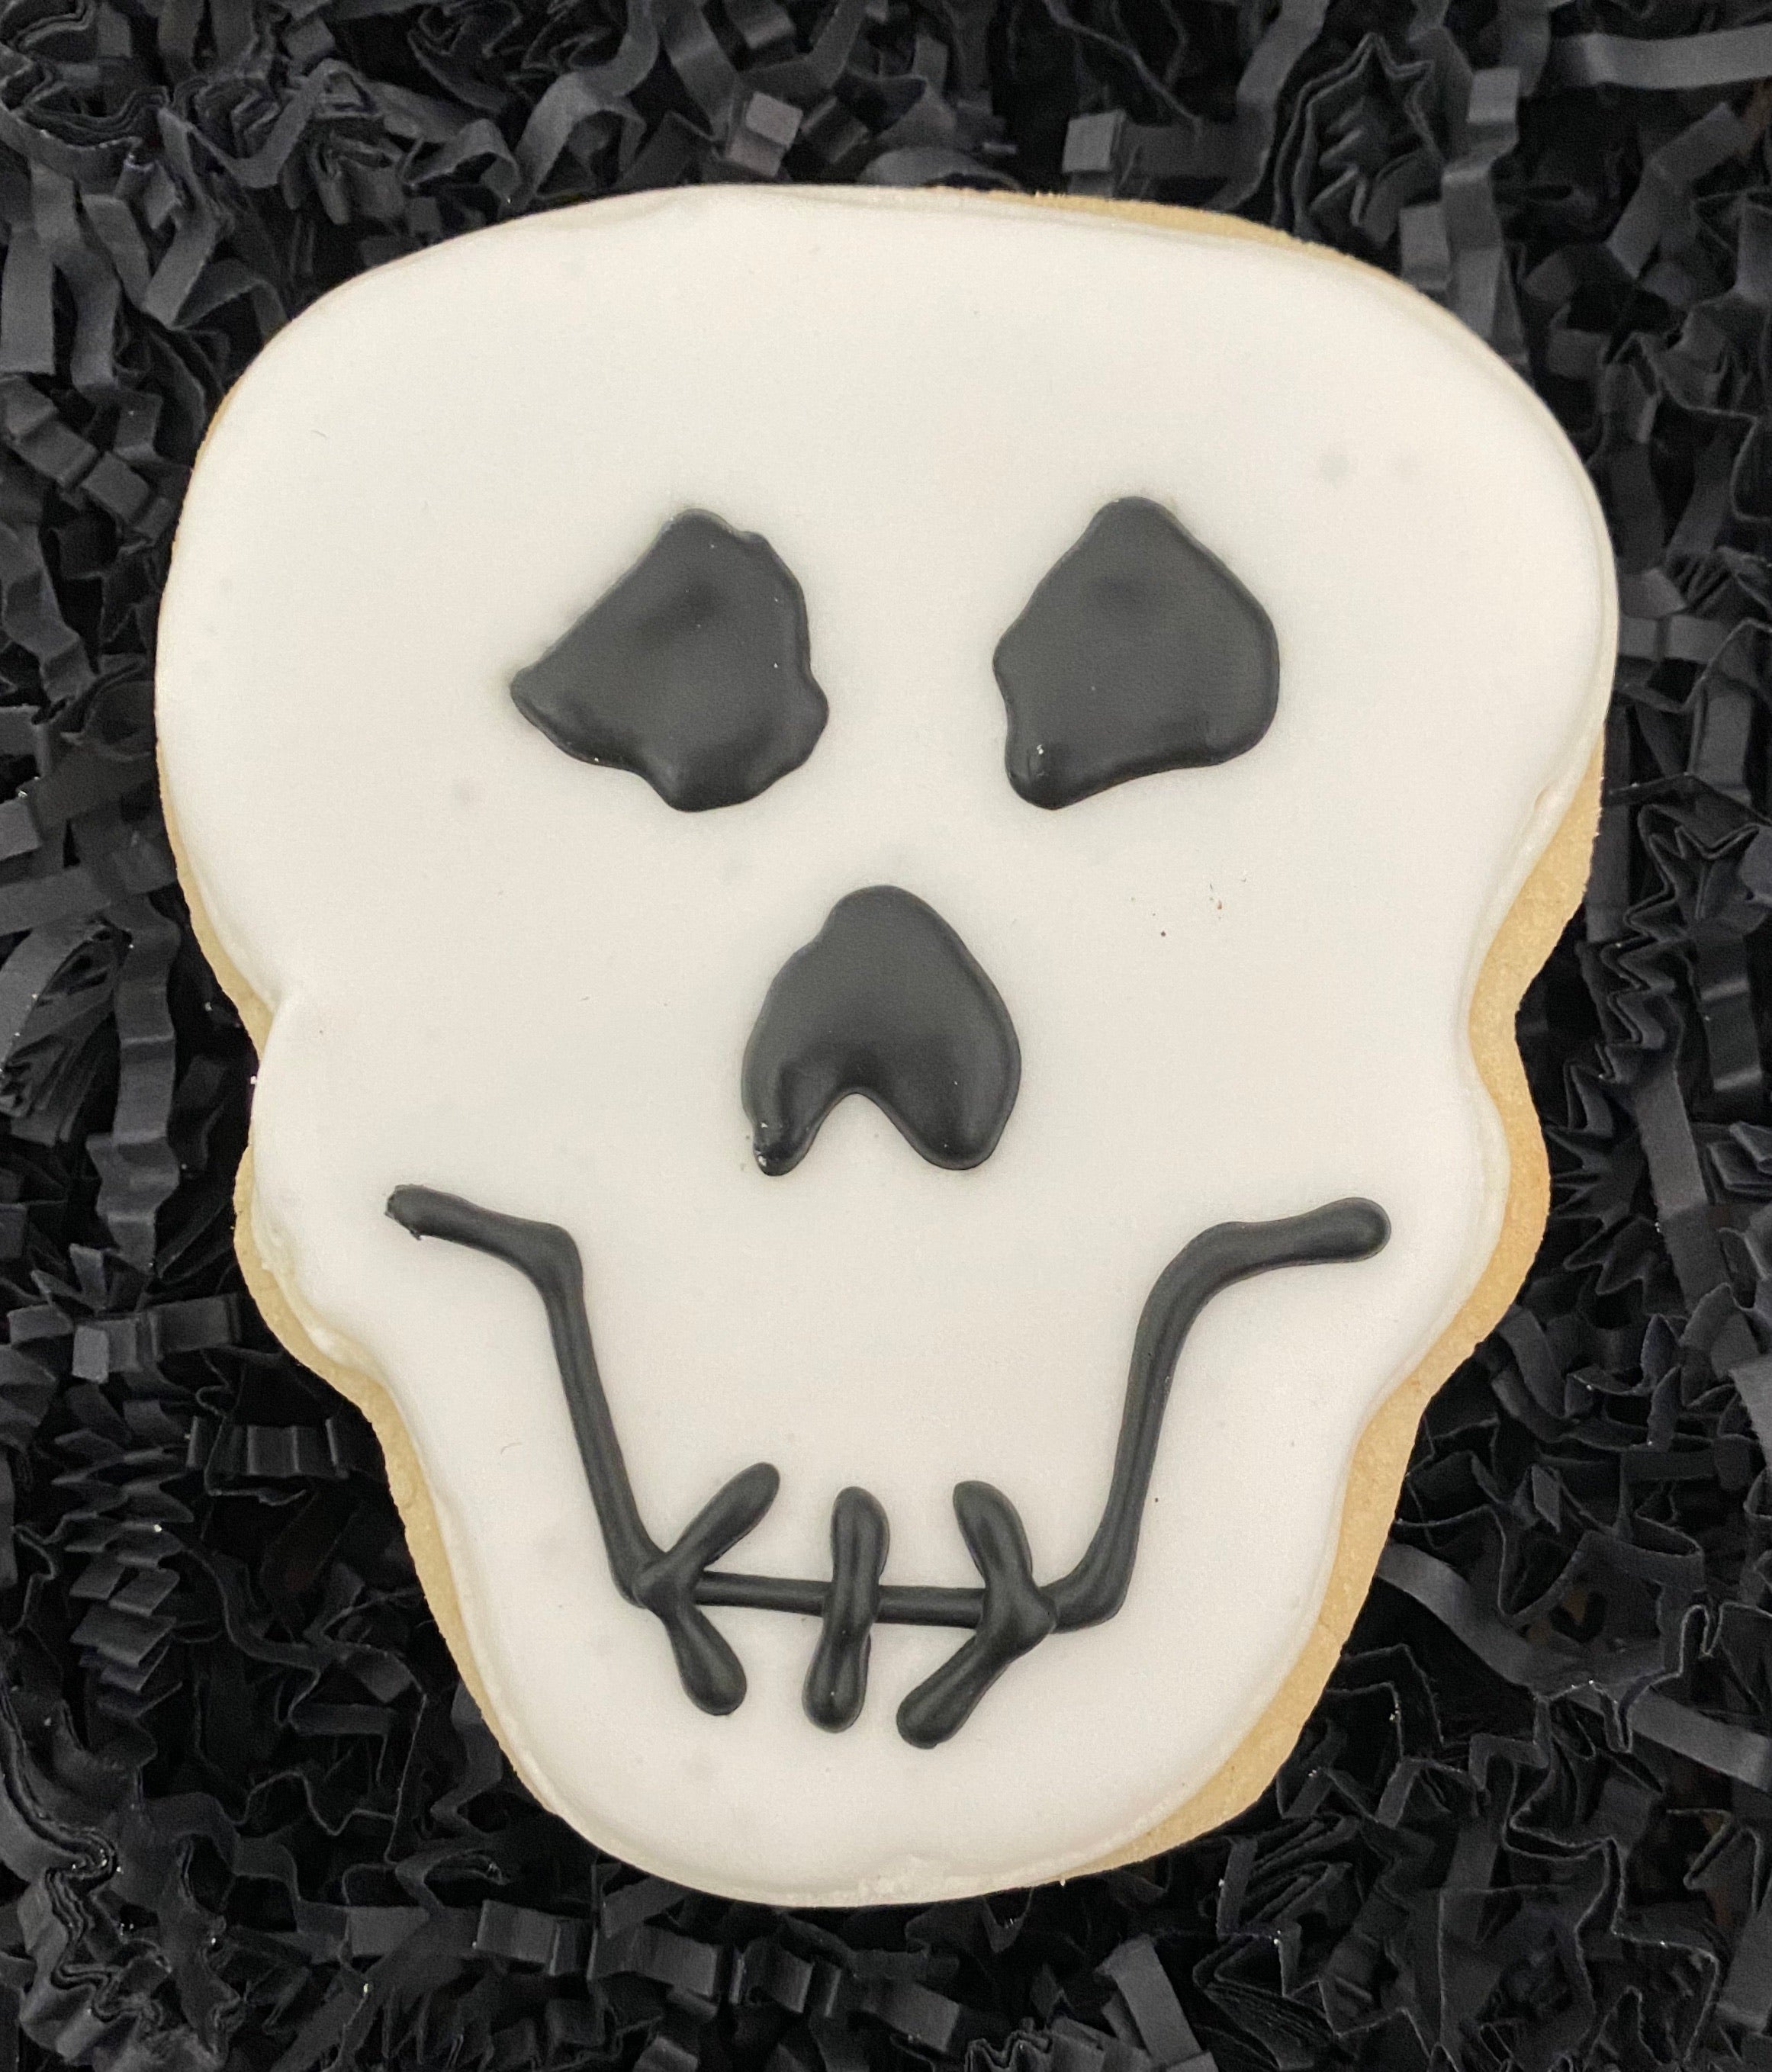 HALLOWEEN SILLY SKULL COOKIE FAVORS